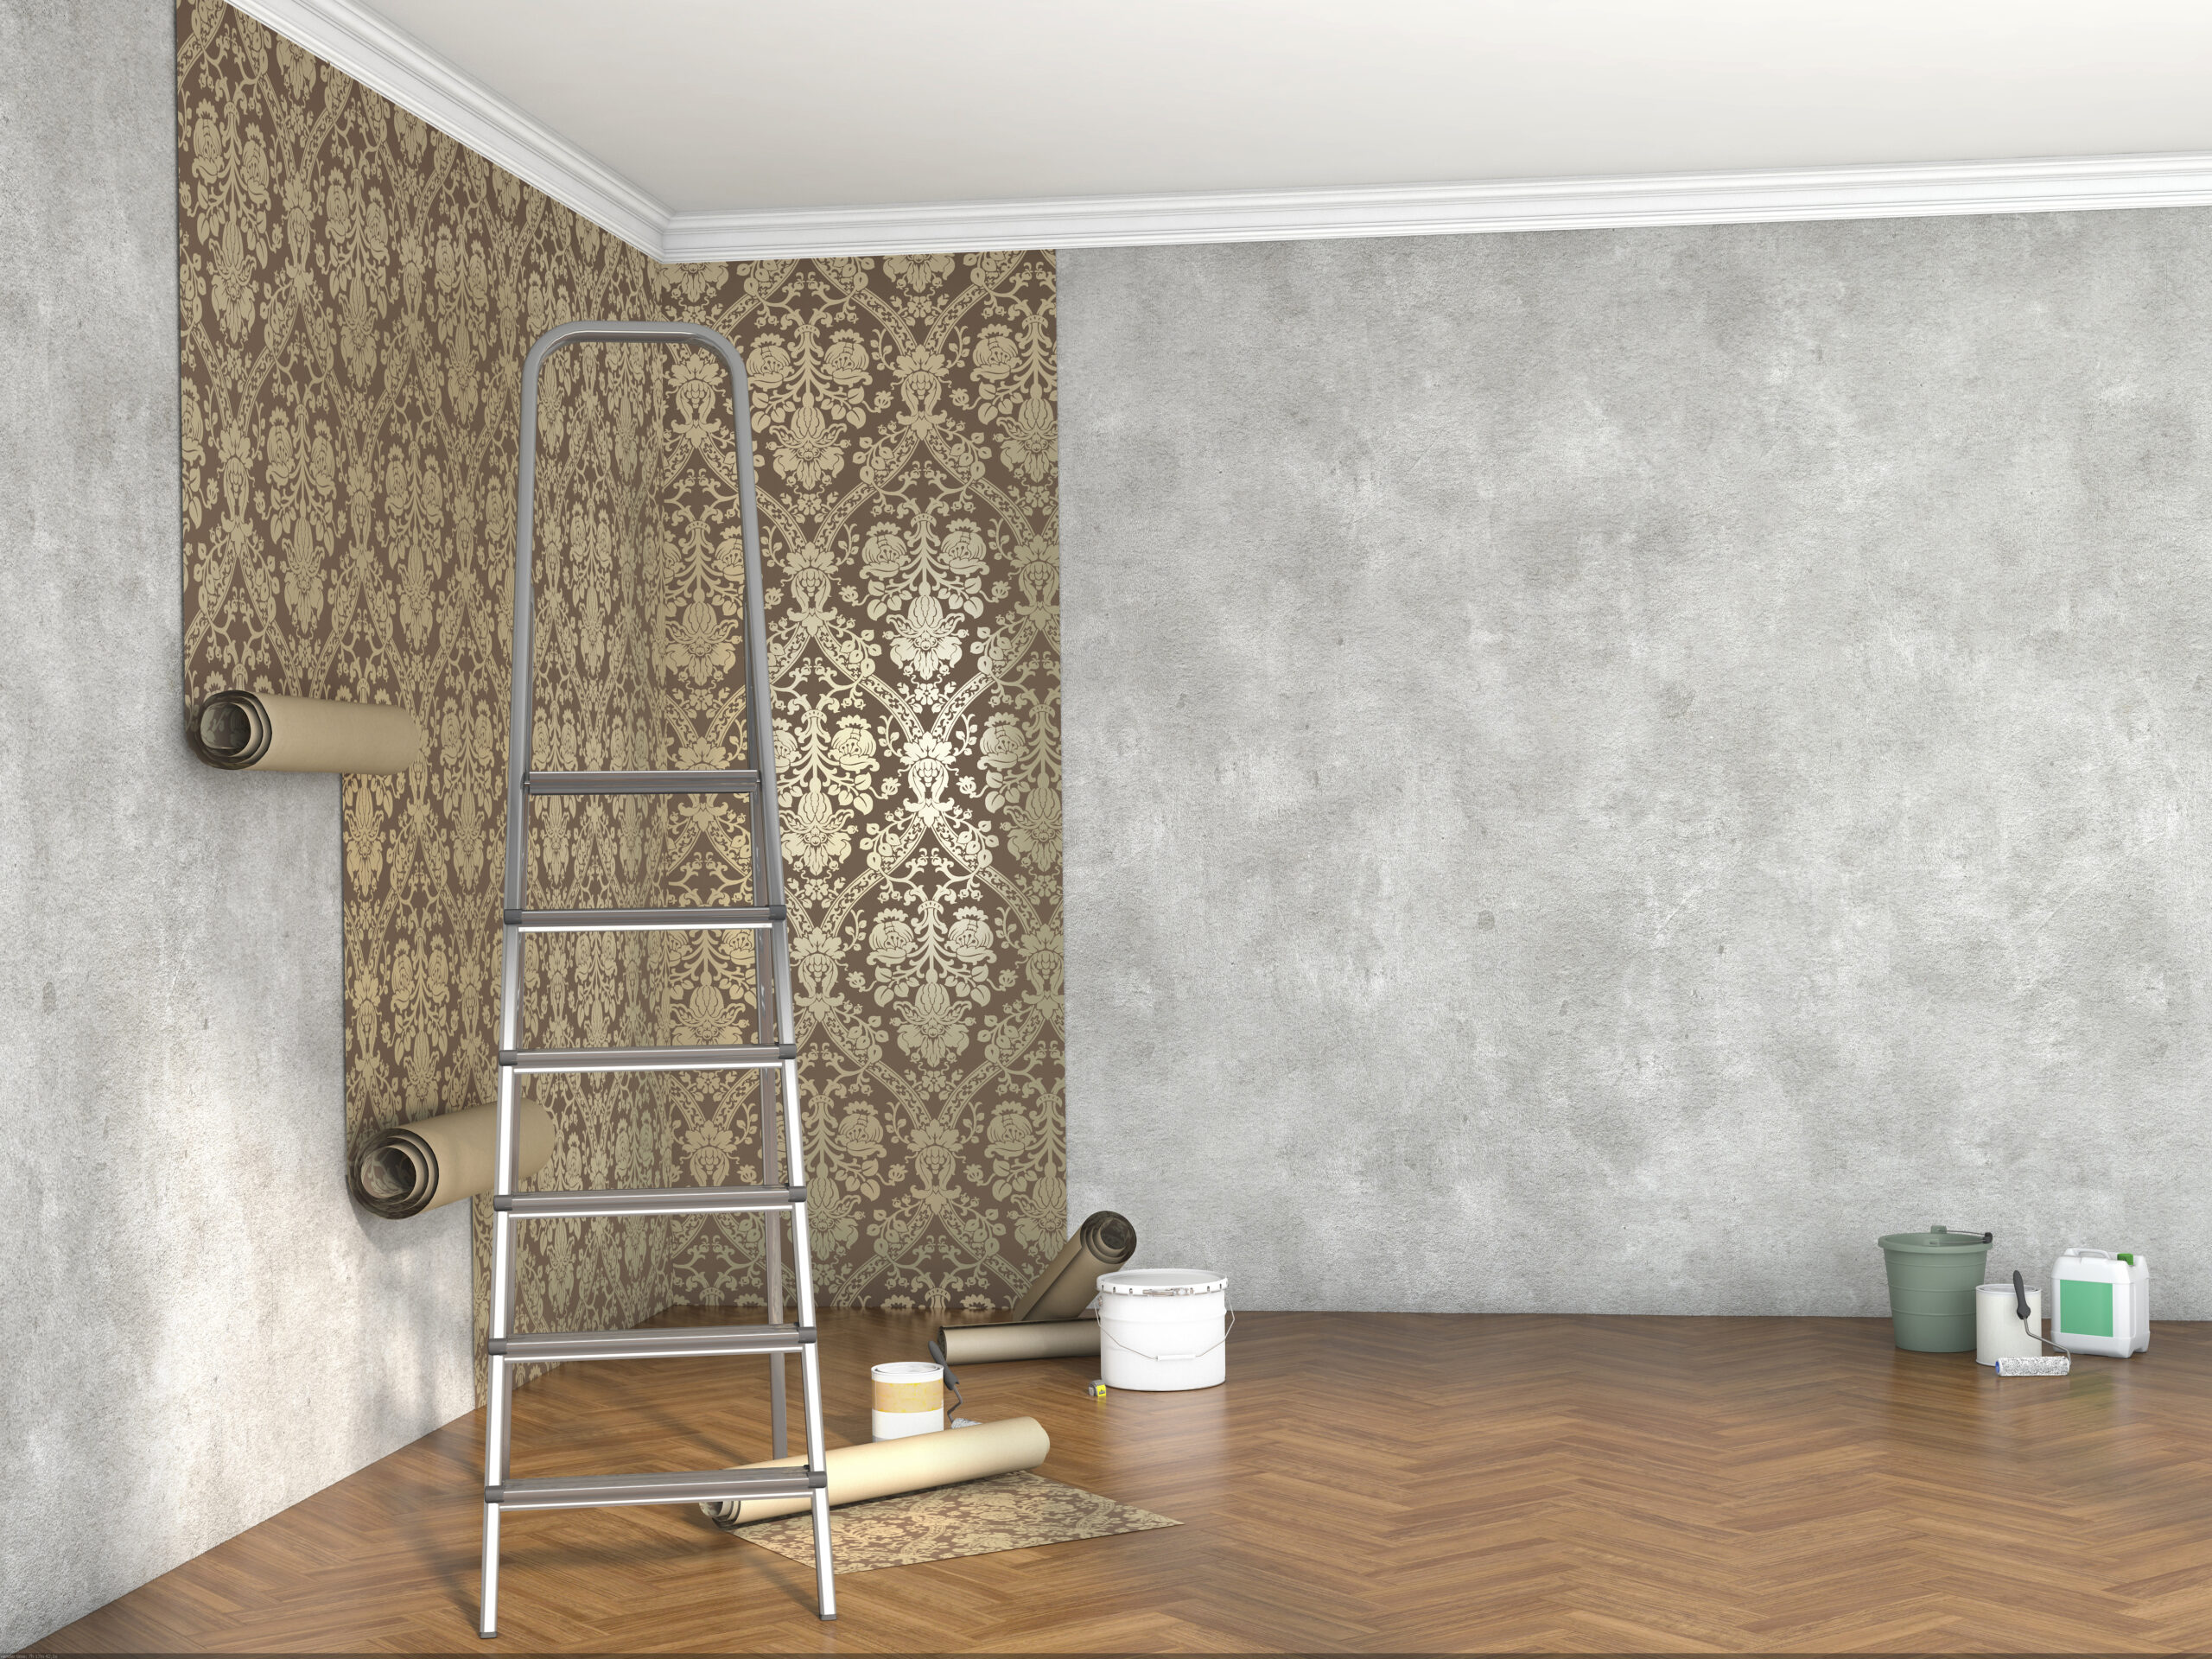 How to Hang Wallpaper - The Guild of Master Craftsmen